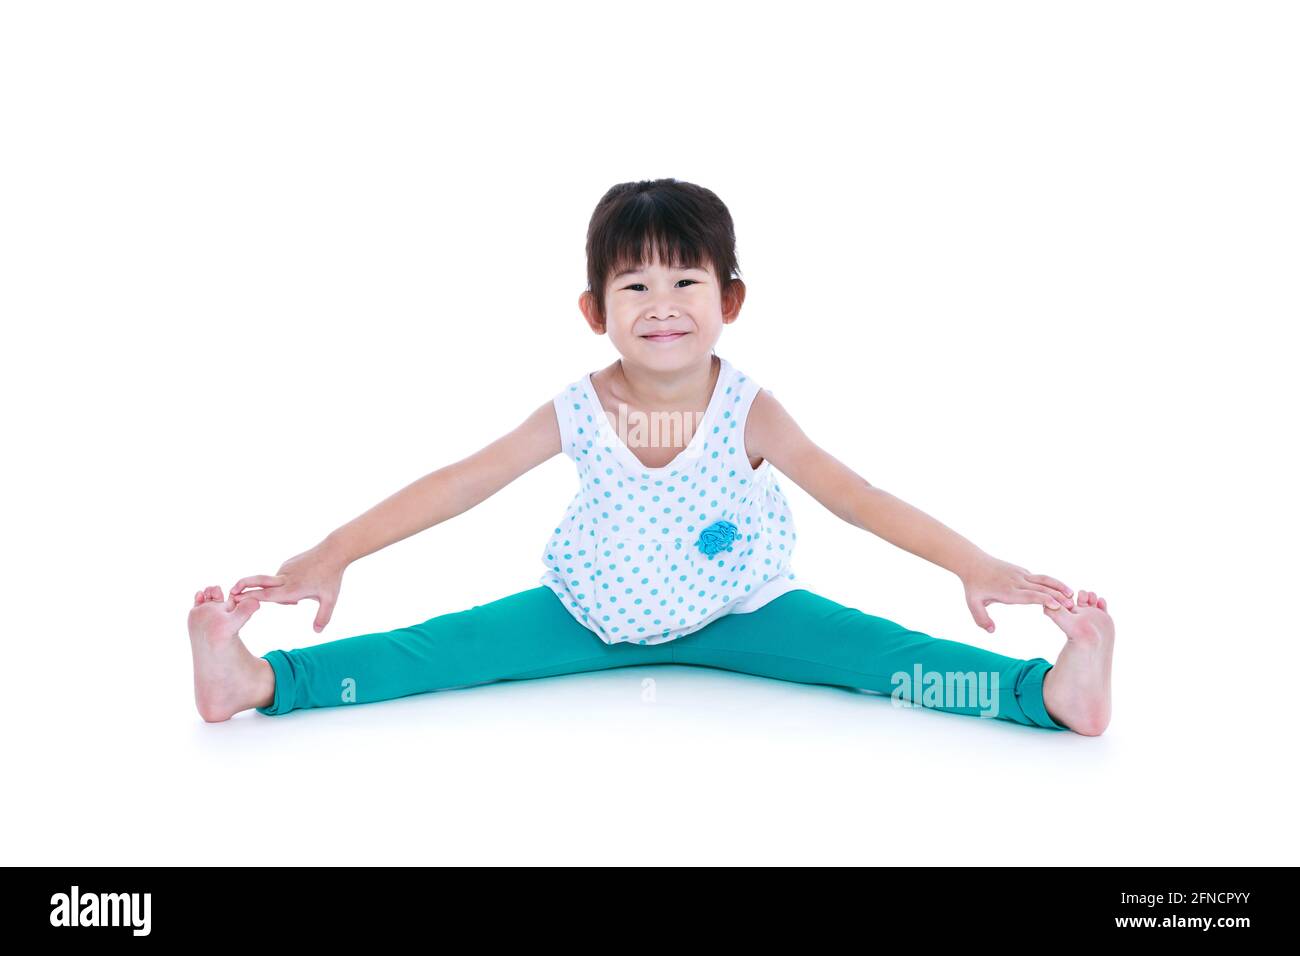 Little cute girl practicing yoga pose, isolated on white :: Stock